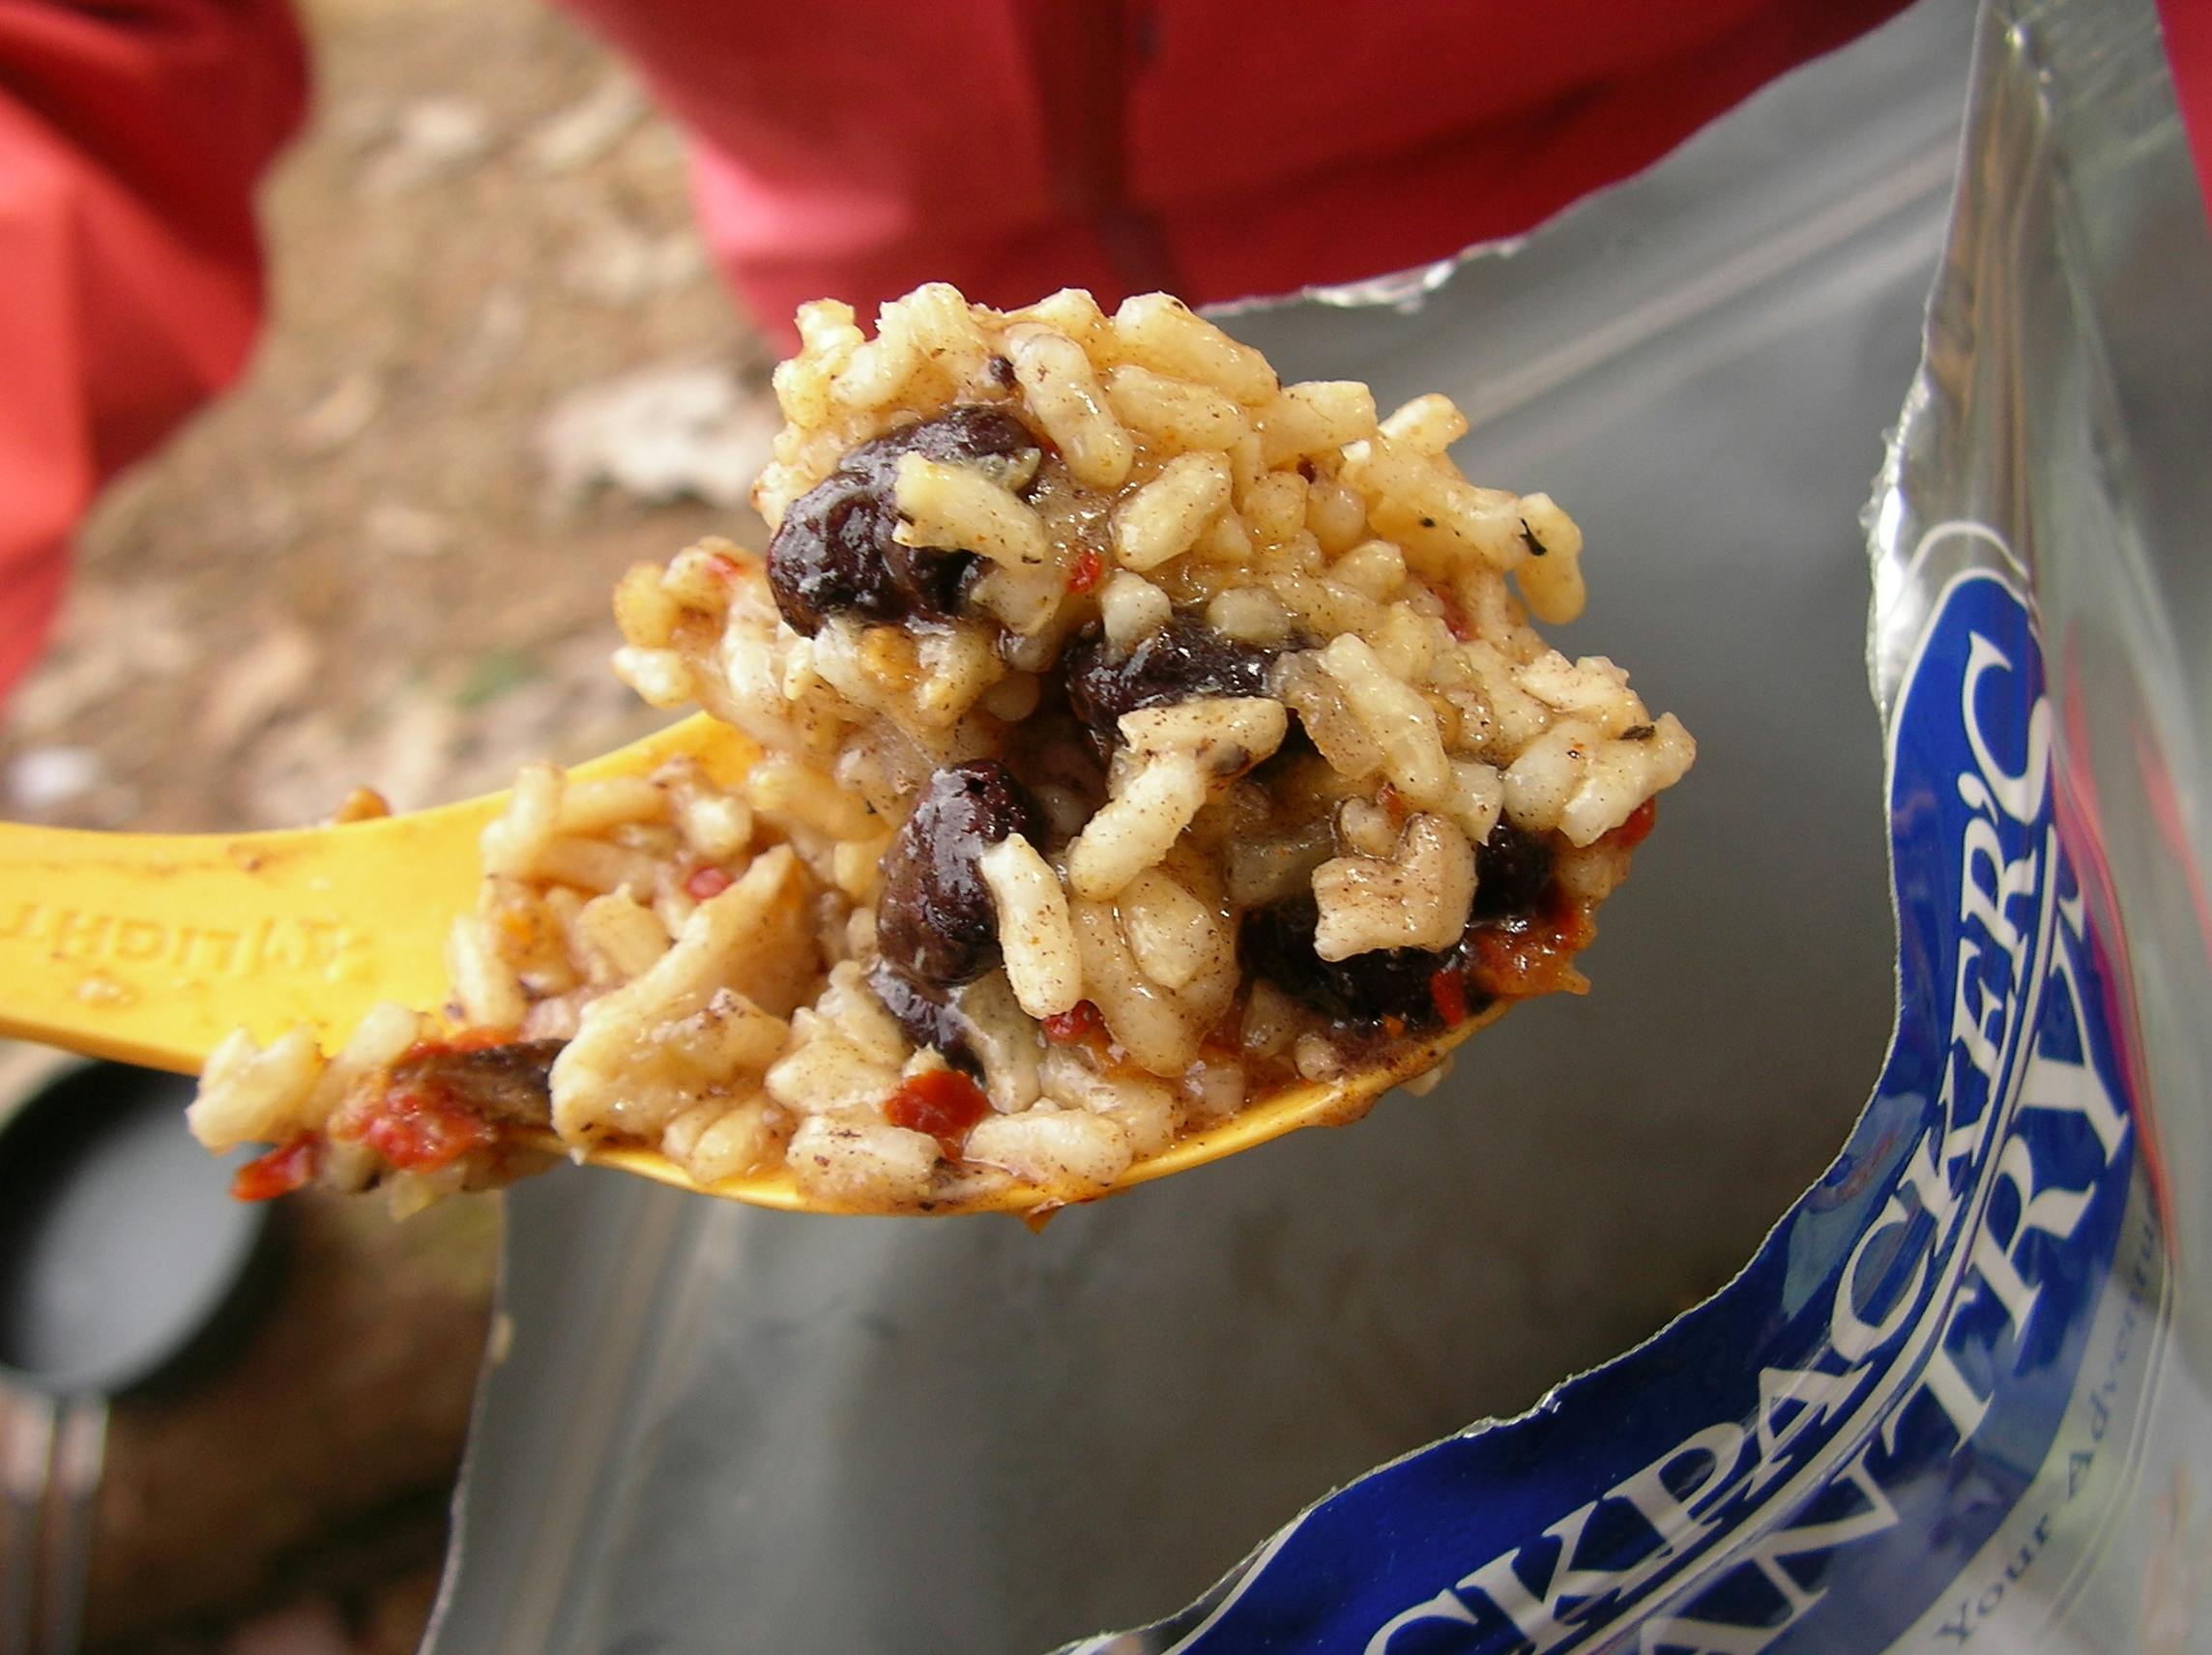 A spoon with food on it. The food is coming from a container of a Backpackers Pantry meal.